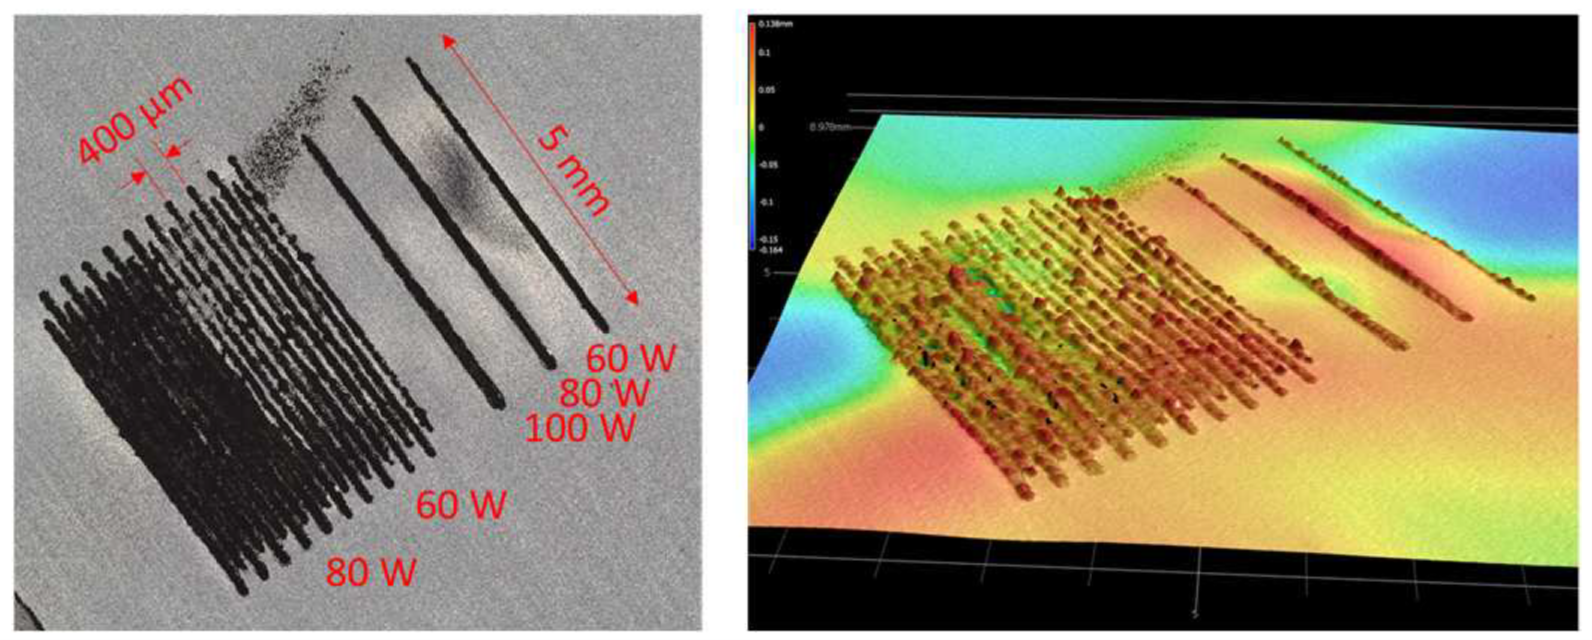 Laser powder bed fusion processing of NMC on Al-foil.